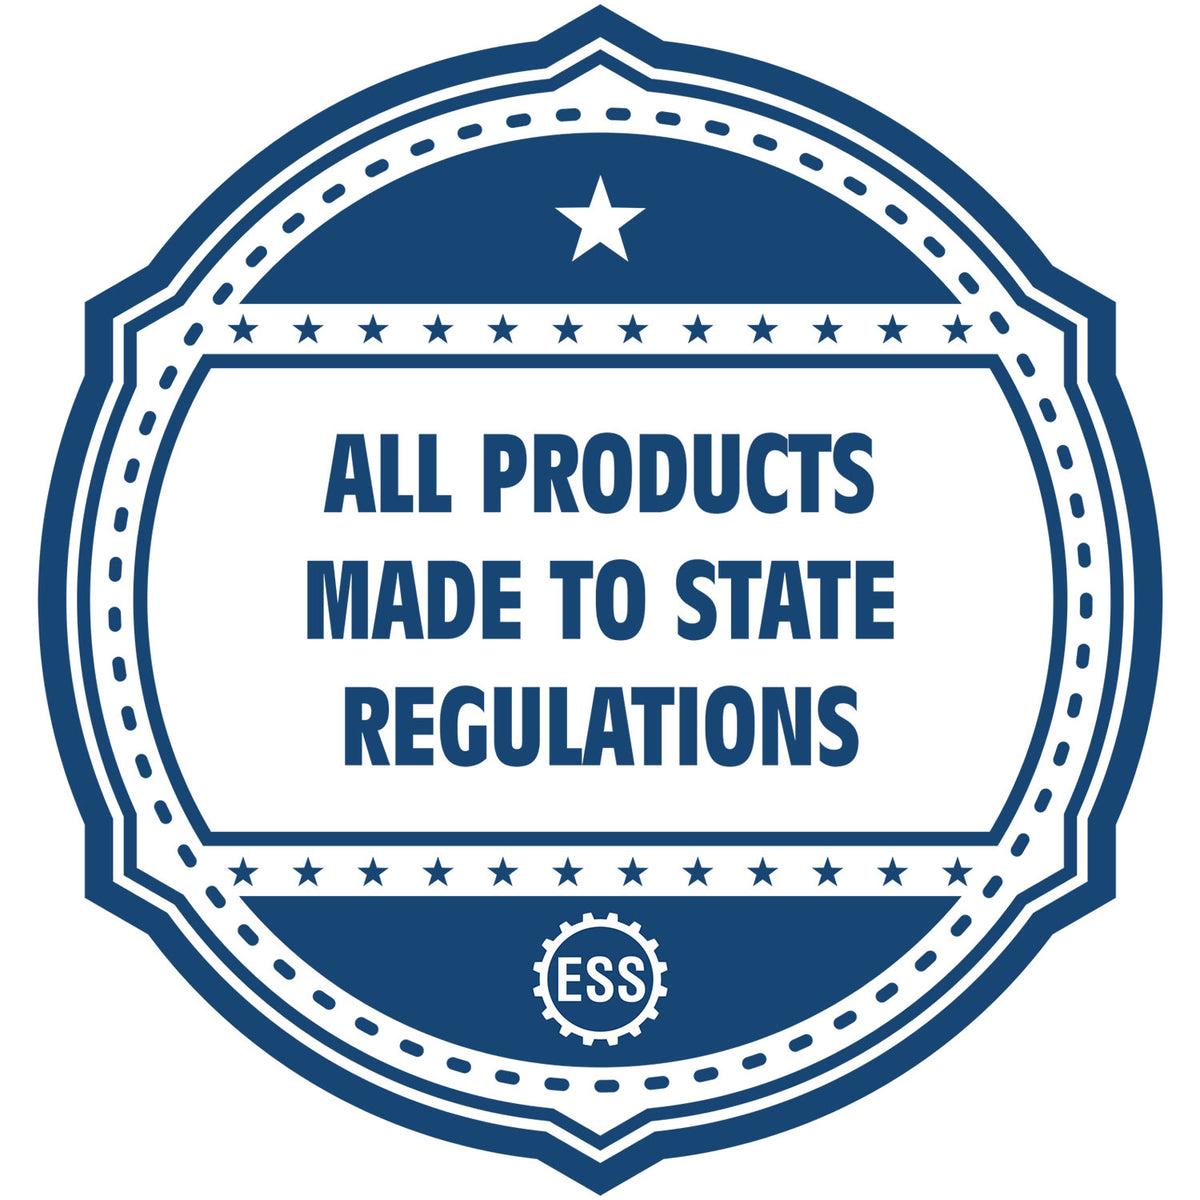 An icon or badge element for the Heavy Duty Cast Iron Colorado Land Surveyor Seal Embosser showing that this product is made in compliance with state regulations.